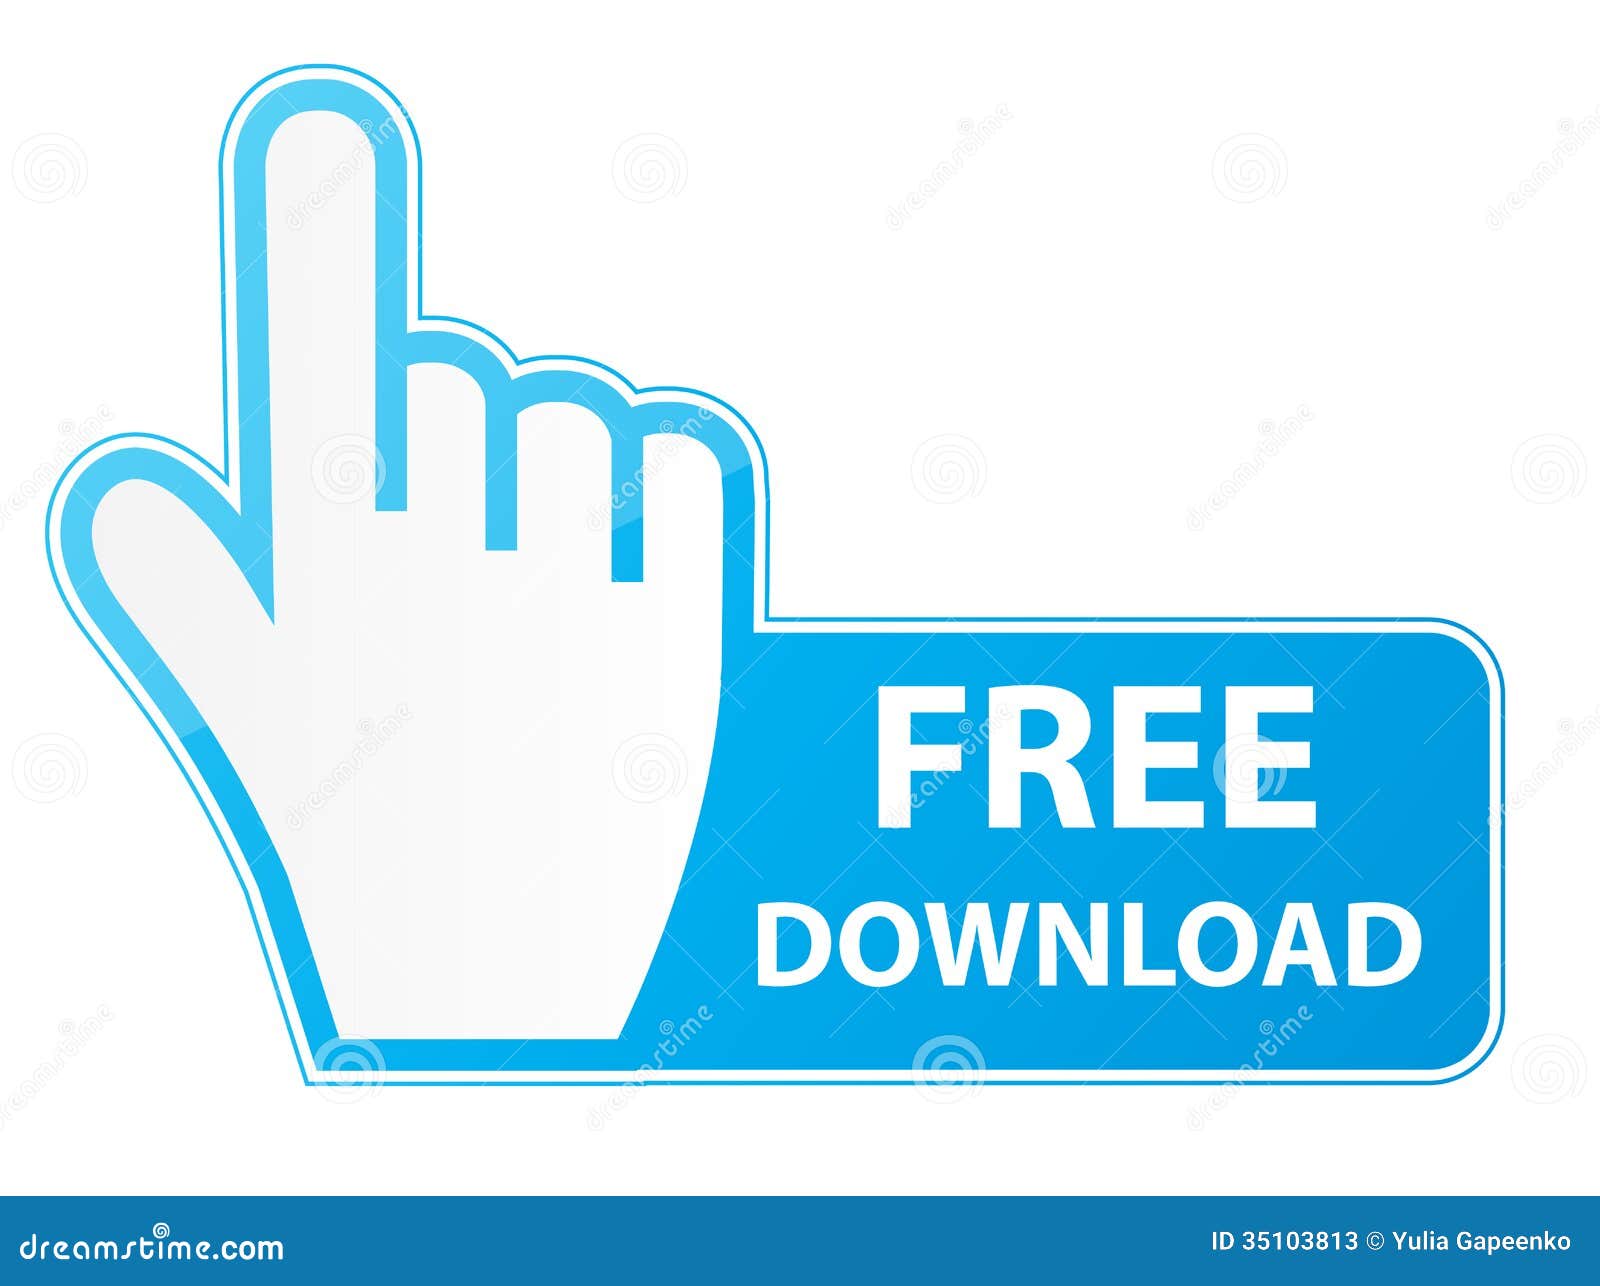 mouse hand cursor free download button vector illustration file eps format 35103813 - Updated Washington